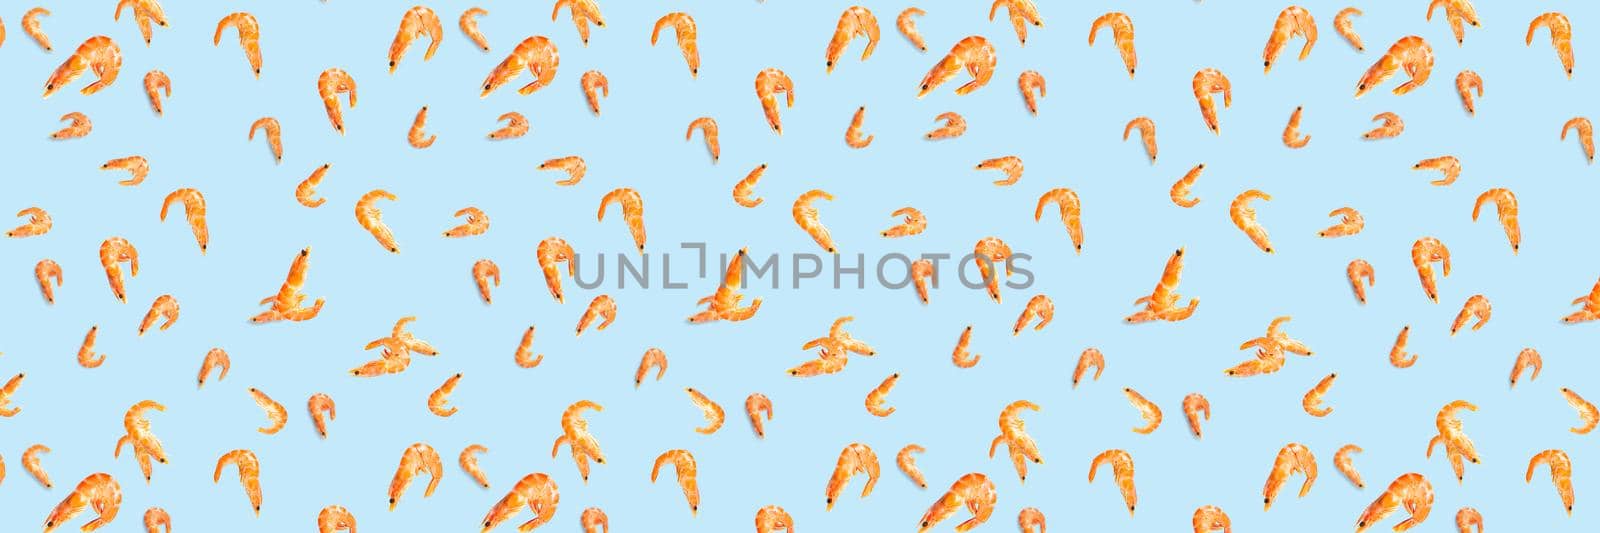 Tiger shrimp. Seafood background made from Prawns isolated on a blue backdrop. modern background from boiled shrimps, Seafood. not seamless pattern by PhotoTime